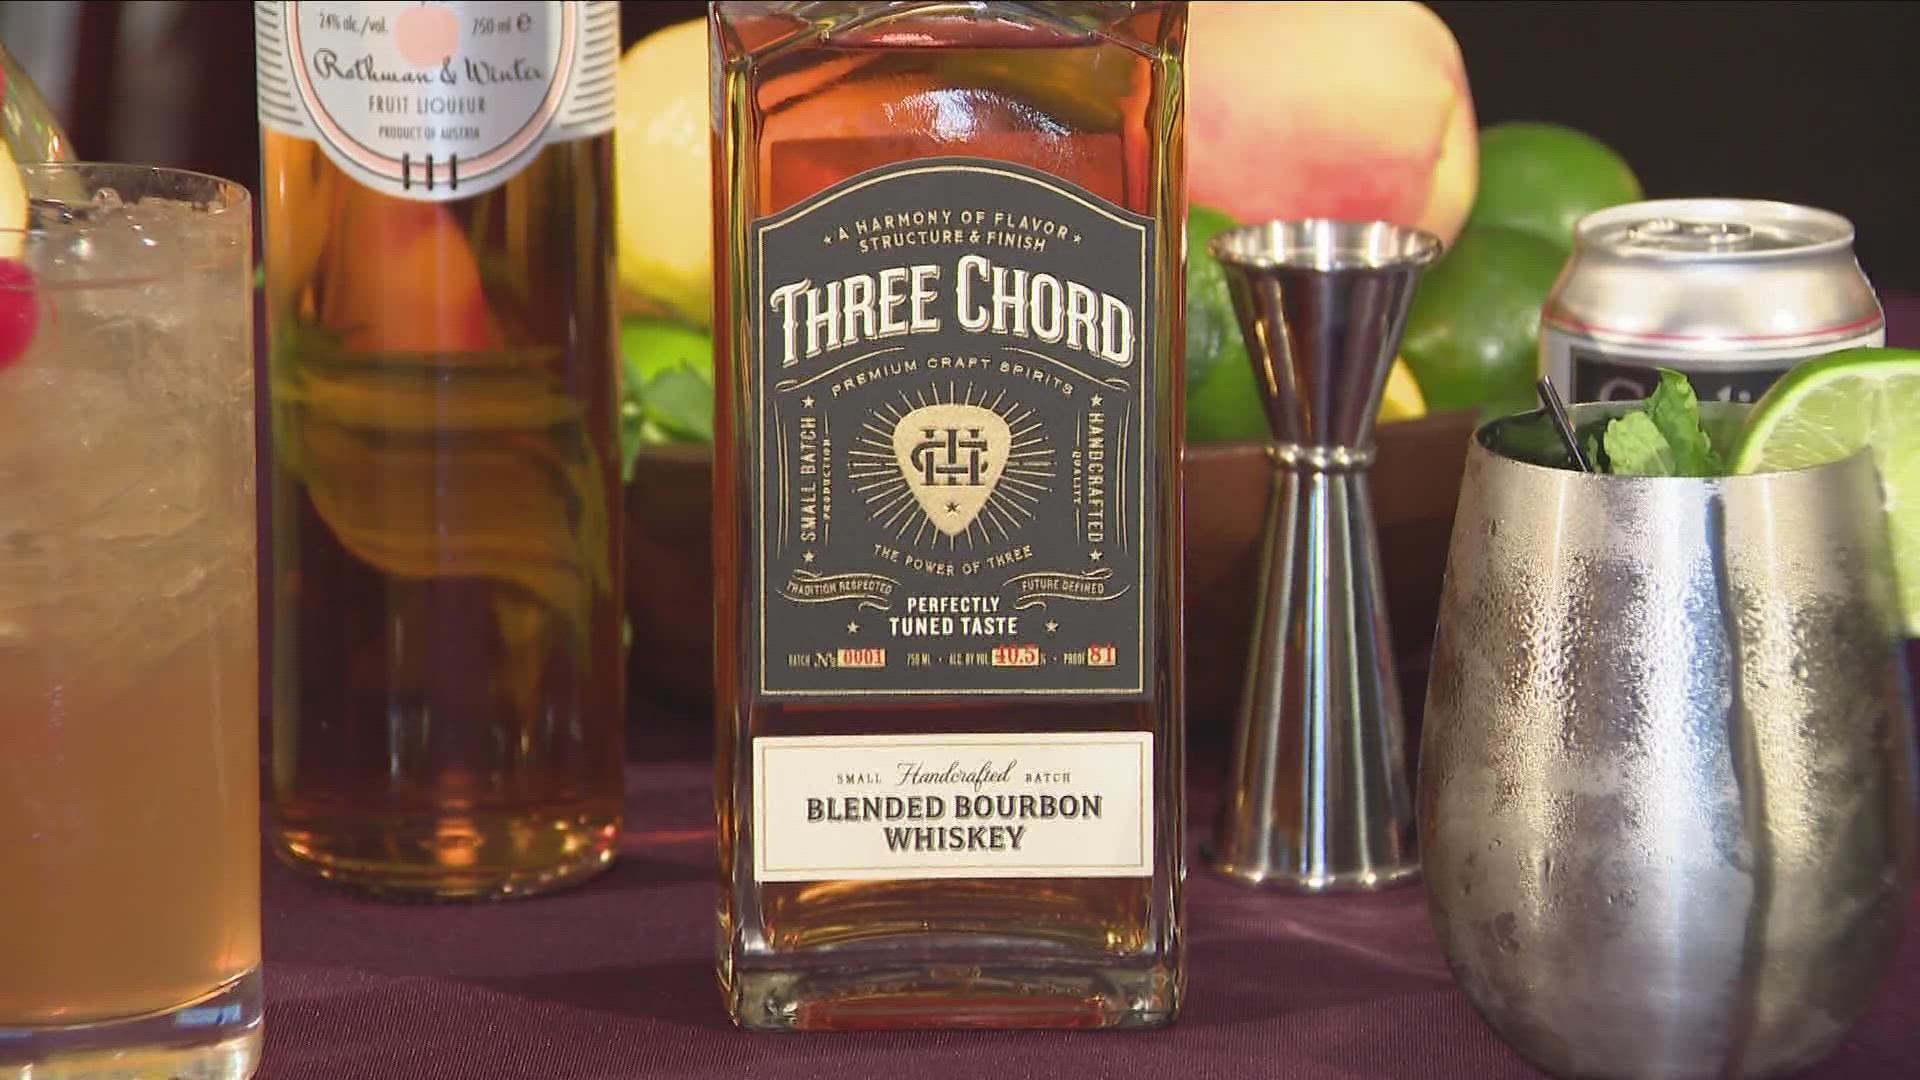 Spiel the Wine - September 17 - Segment 3 (THIS VIDEO IS SPONSORED BY THREE CHORD BOURBON)